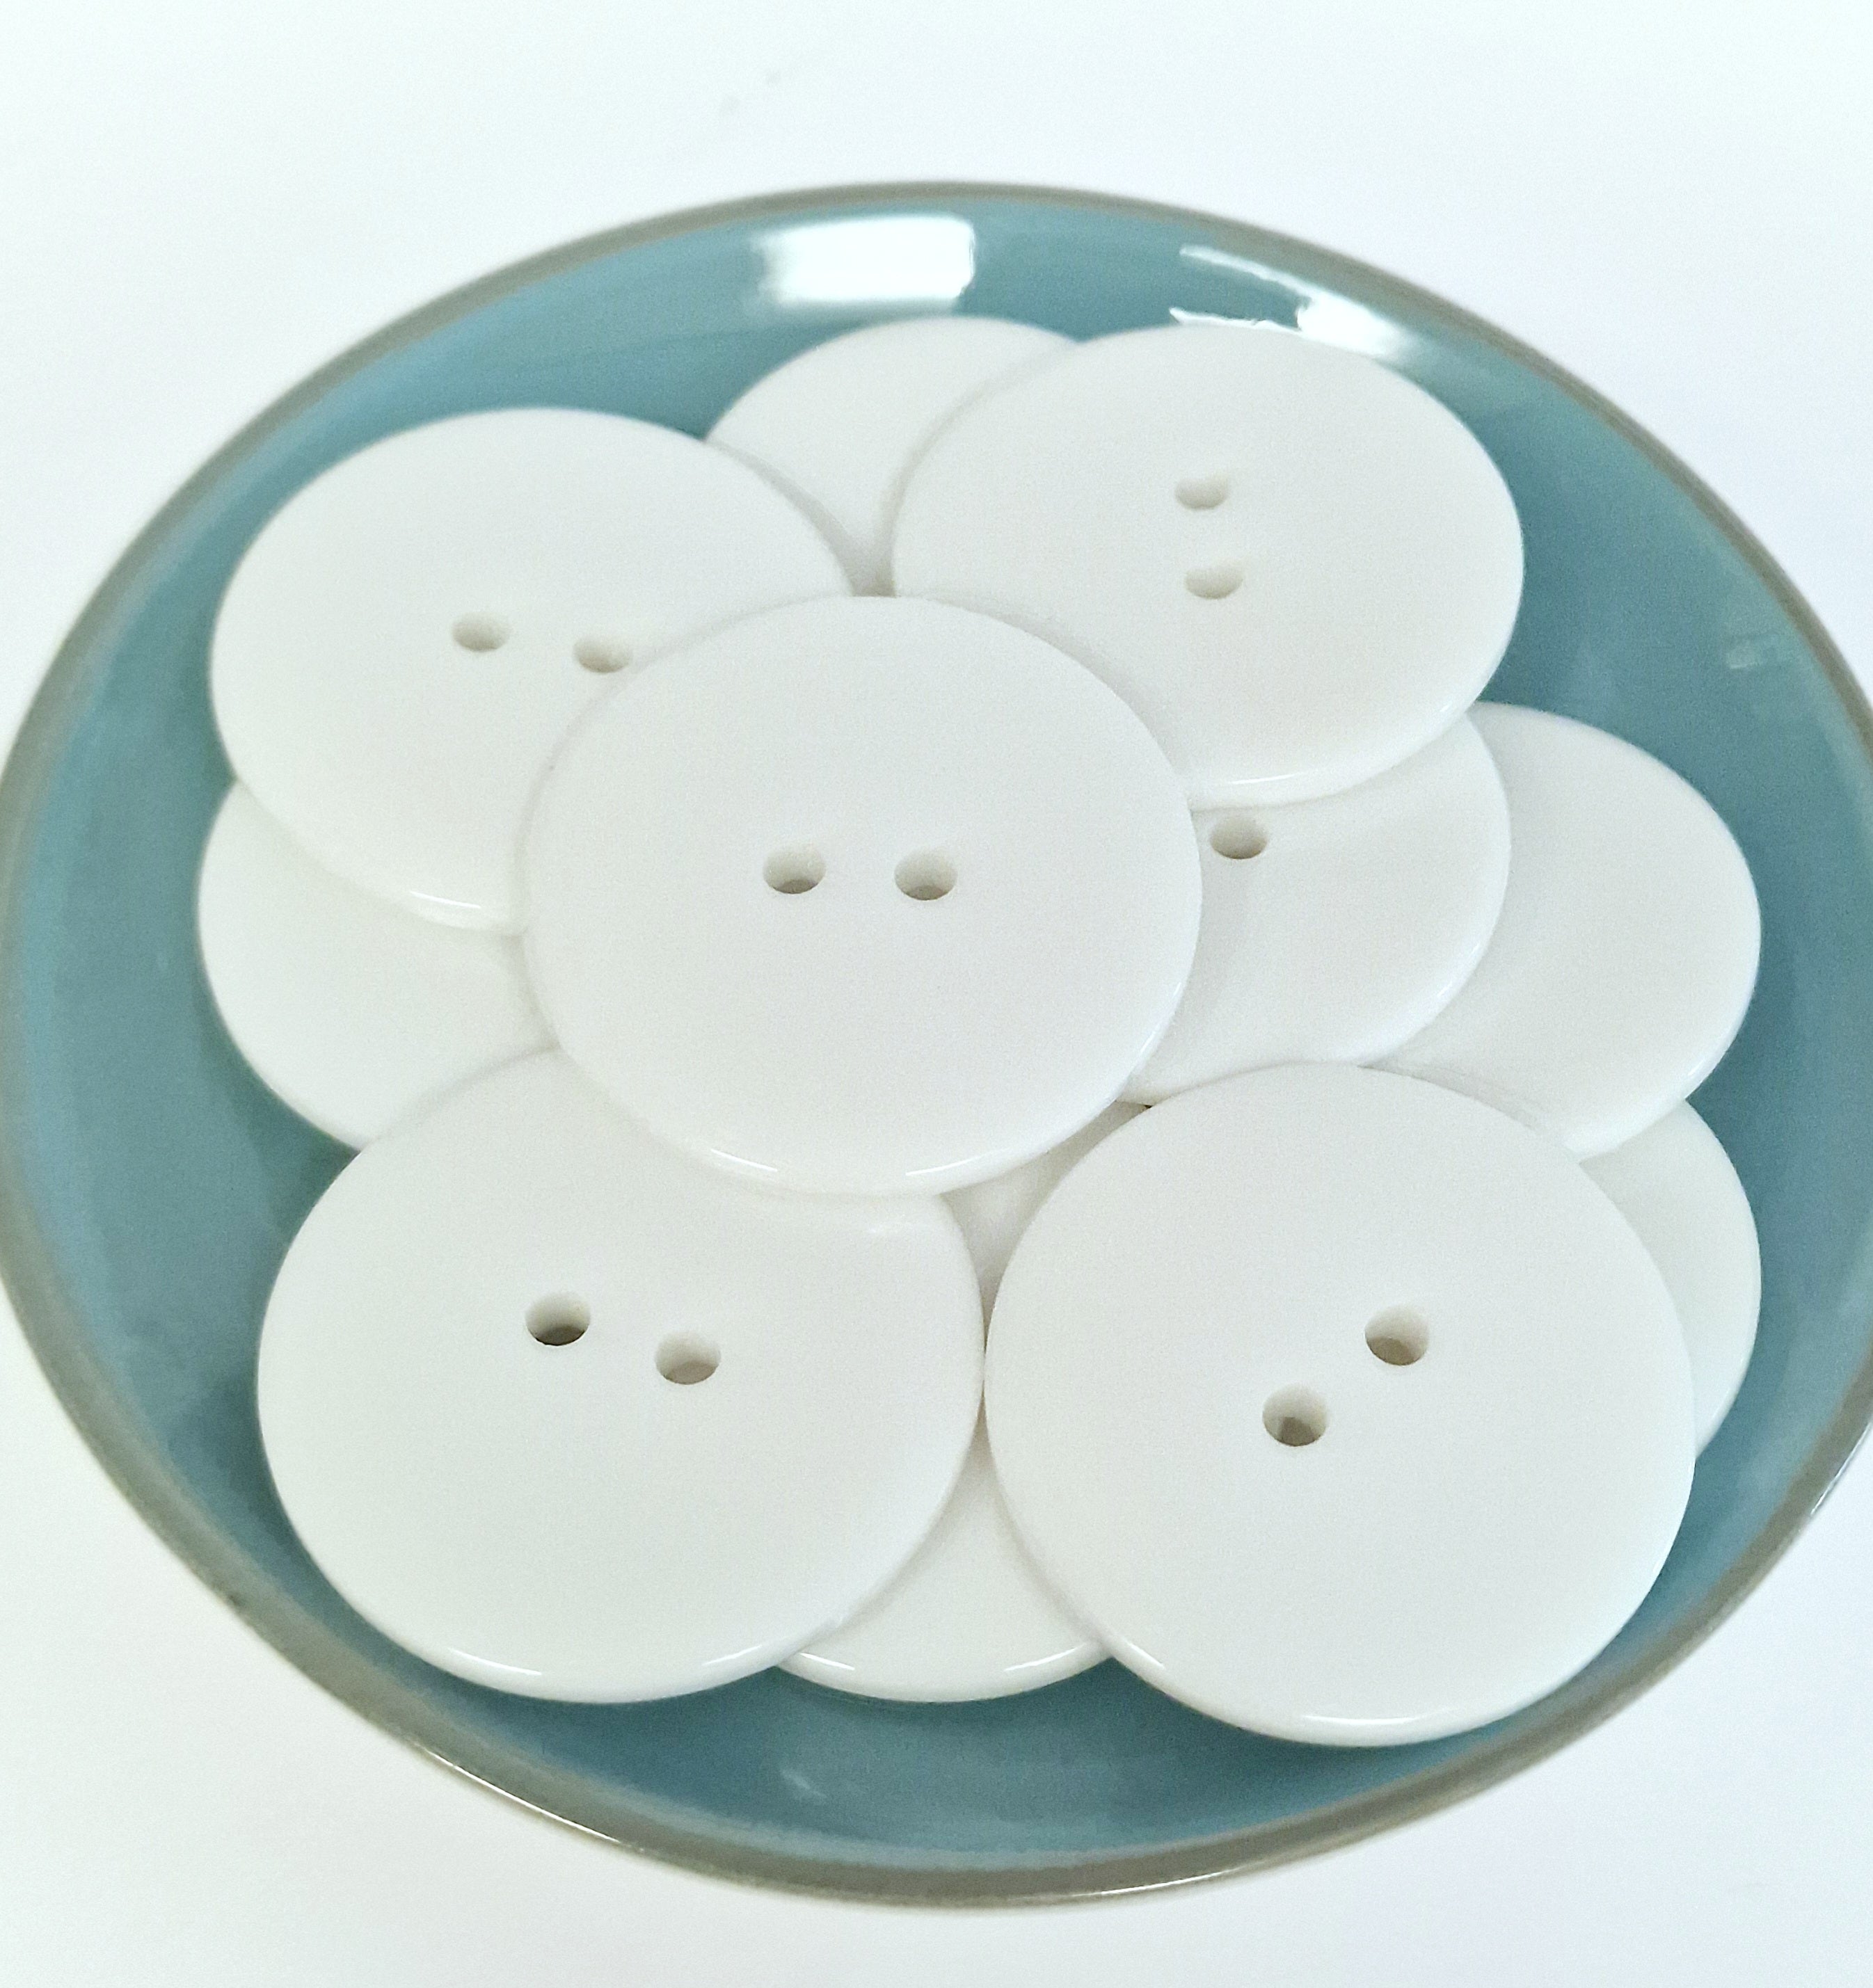 MajorCrafts 8pcs 34mm White 2 holes Large Round Resin Sewing Buttons